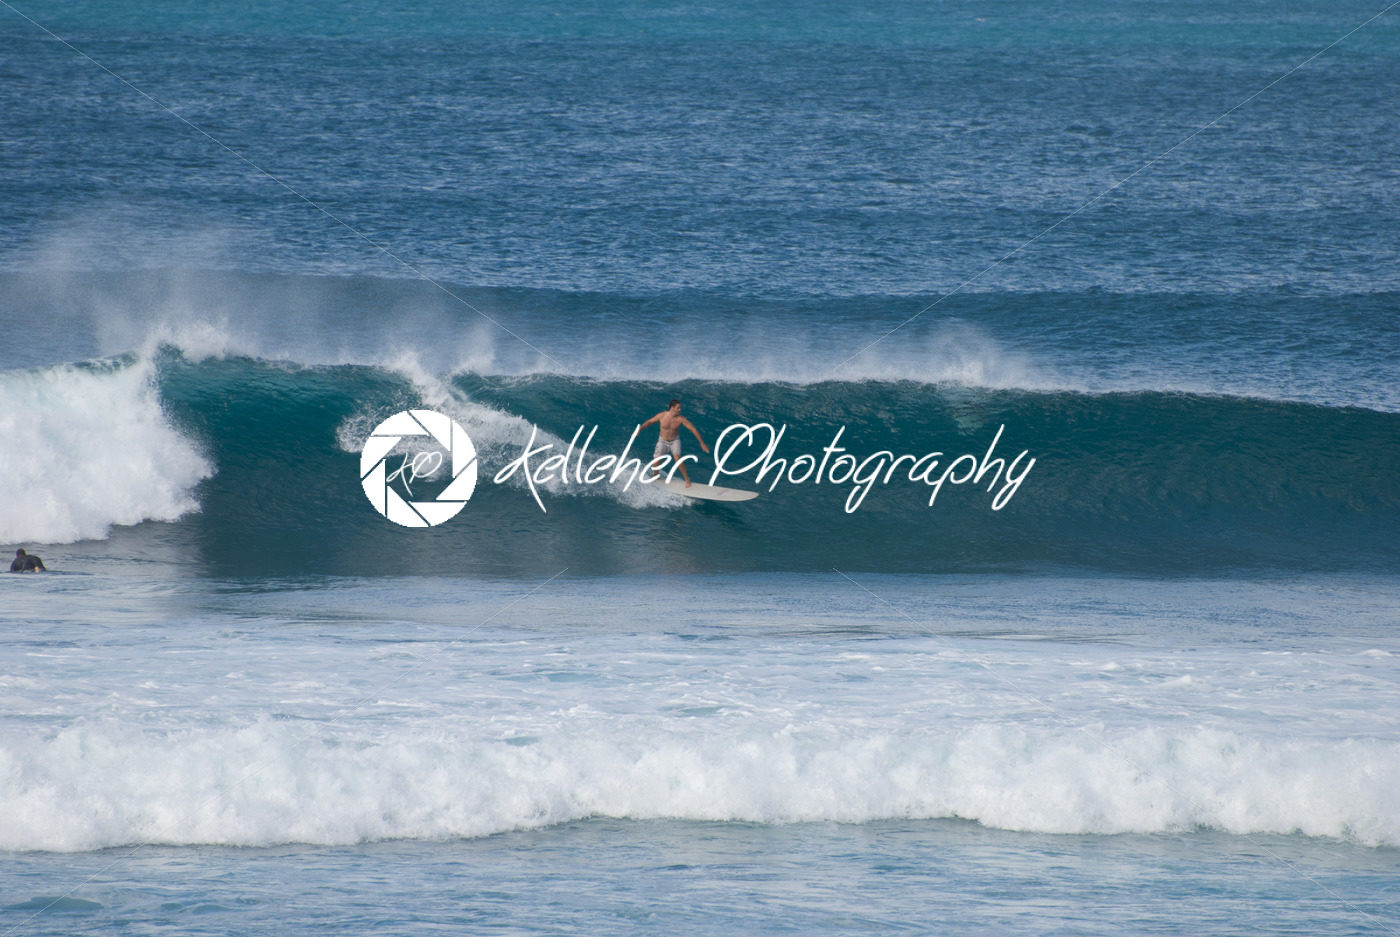 MAUI, HI – DECEMBER 8: Surfers ride a big waves in Maui on December 8, 2007 - Kelleher Photography Store